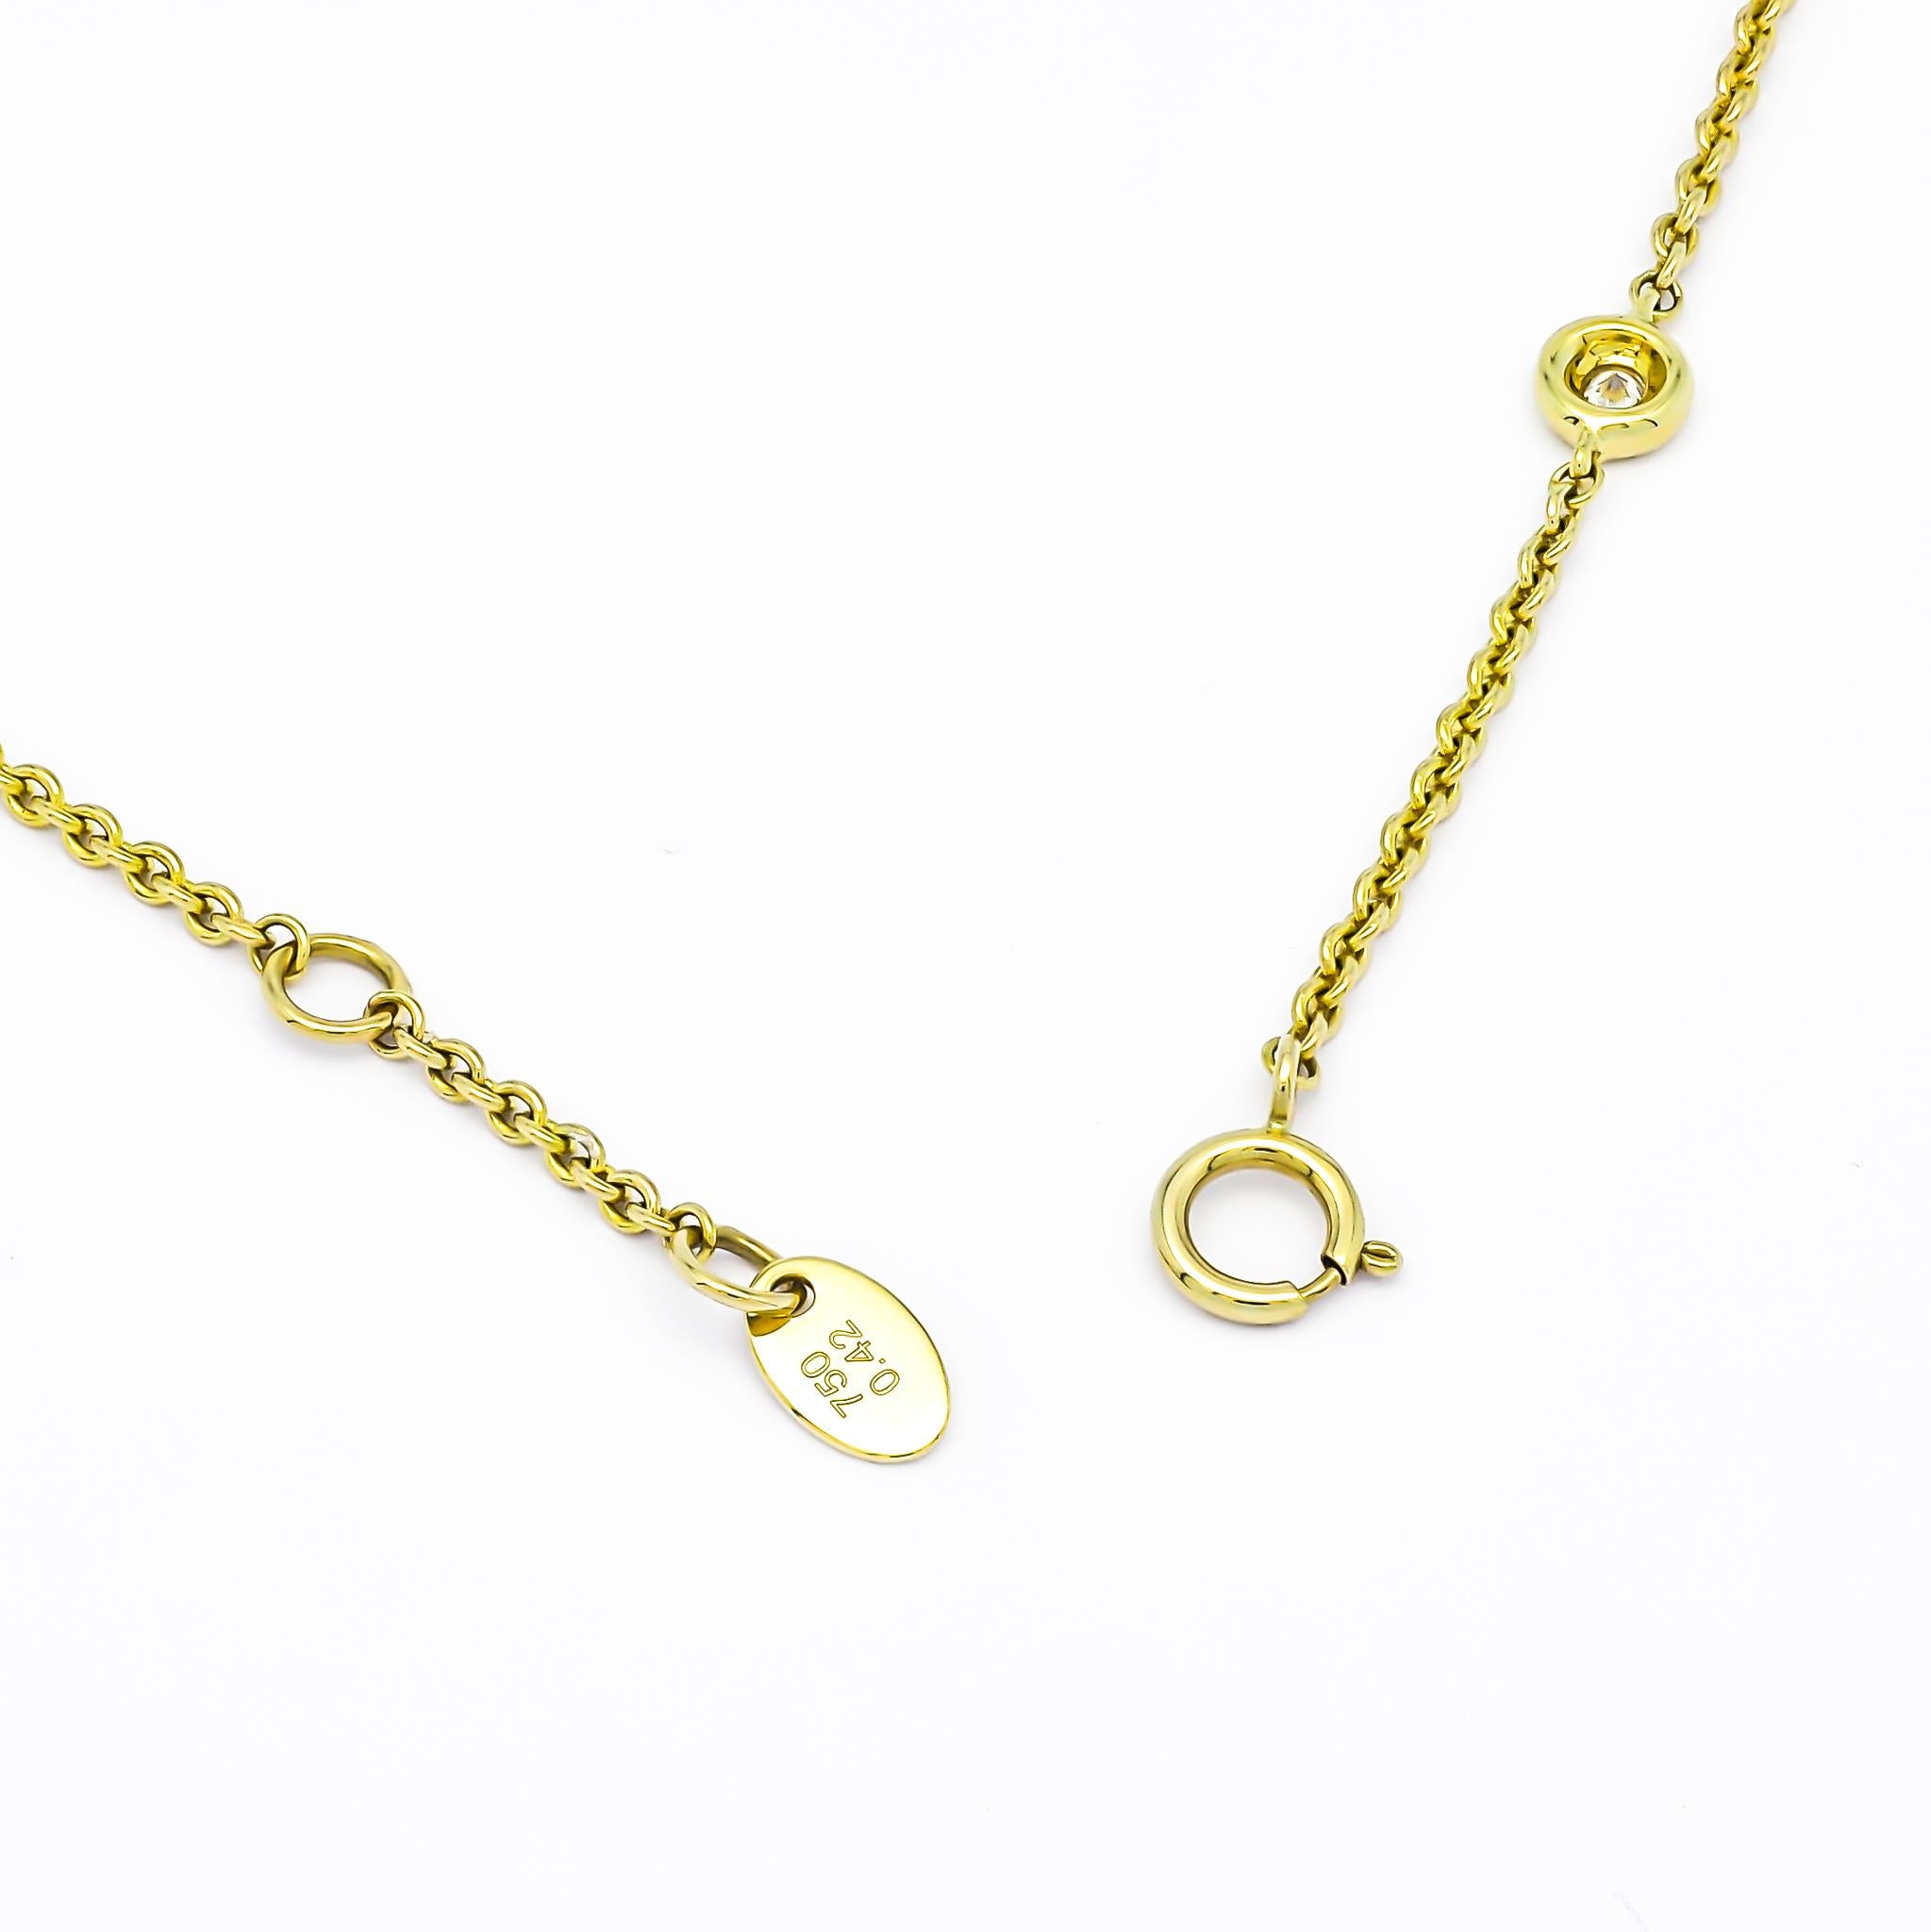 Round Cut Natural Diamond 0.14 carats 18 Karats Yellow Gold Chain Link Bracelet  For Sale